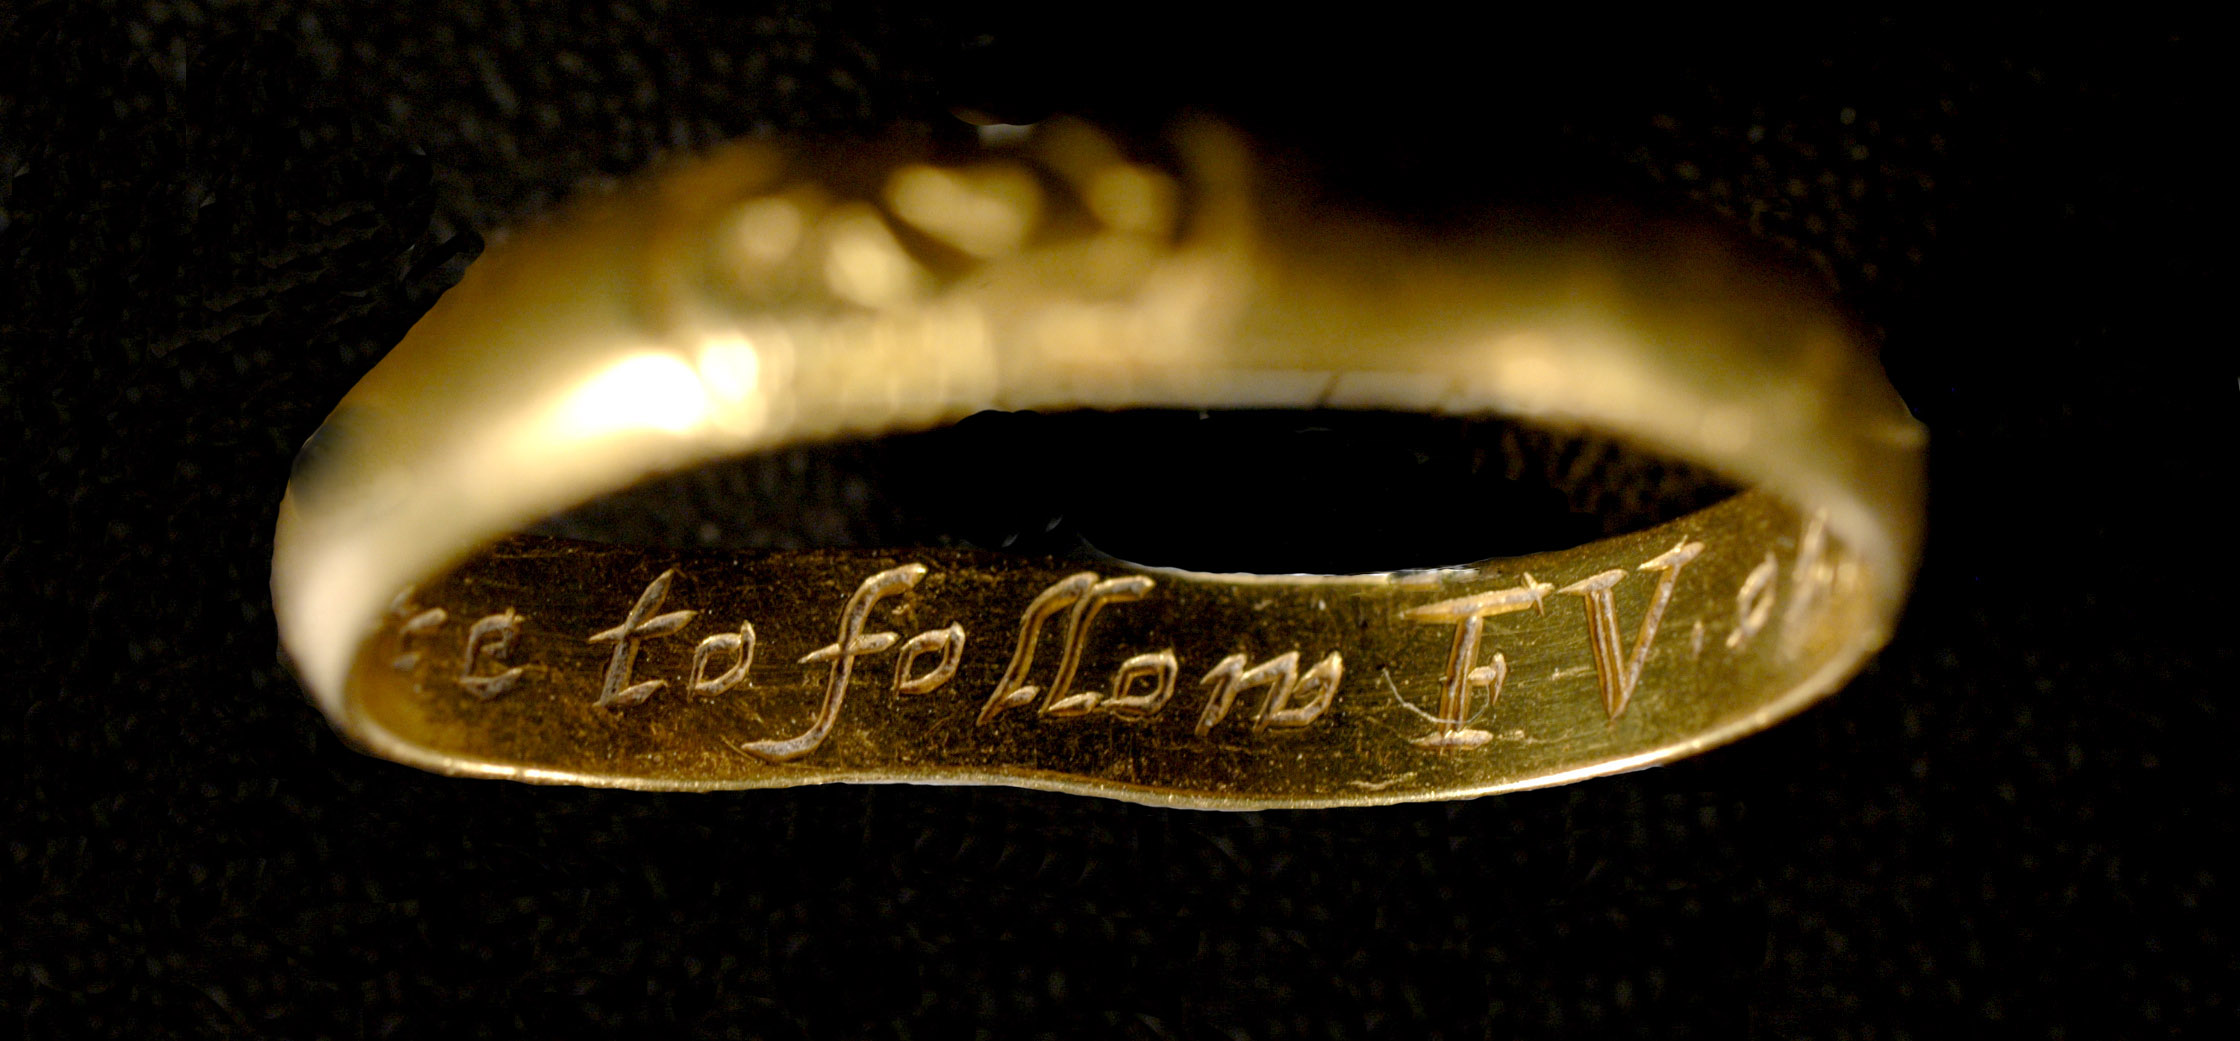 Mourning ring inscription detail